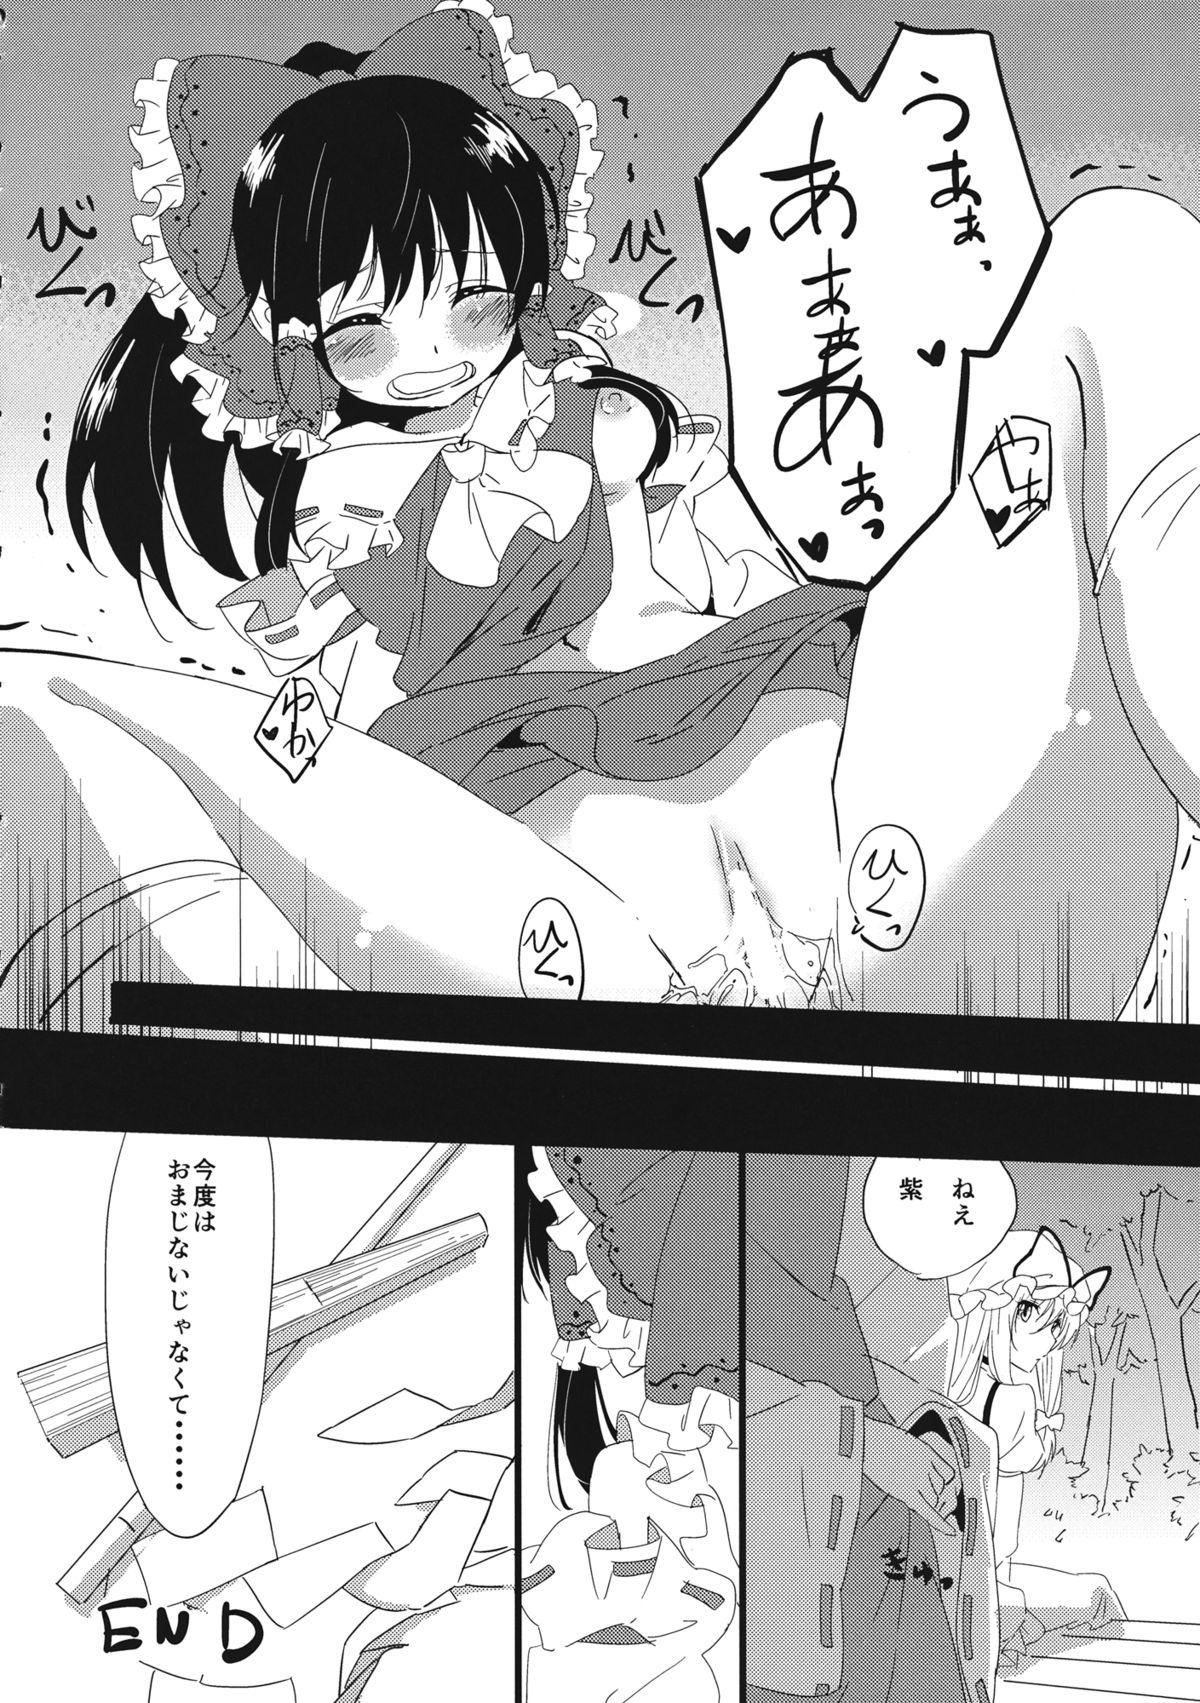 Alone Touhou Muchi Shichu Goudou - Toho joint magazine sex in the ignorant situations - Touhou project Naija - Page 8